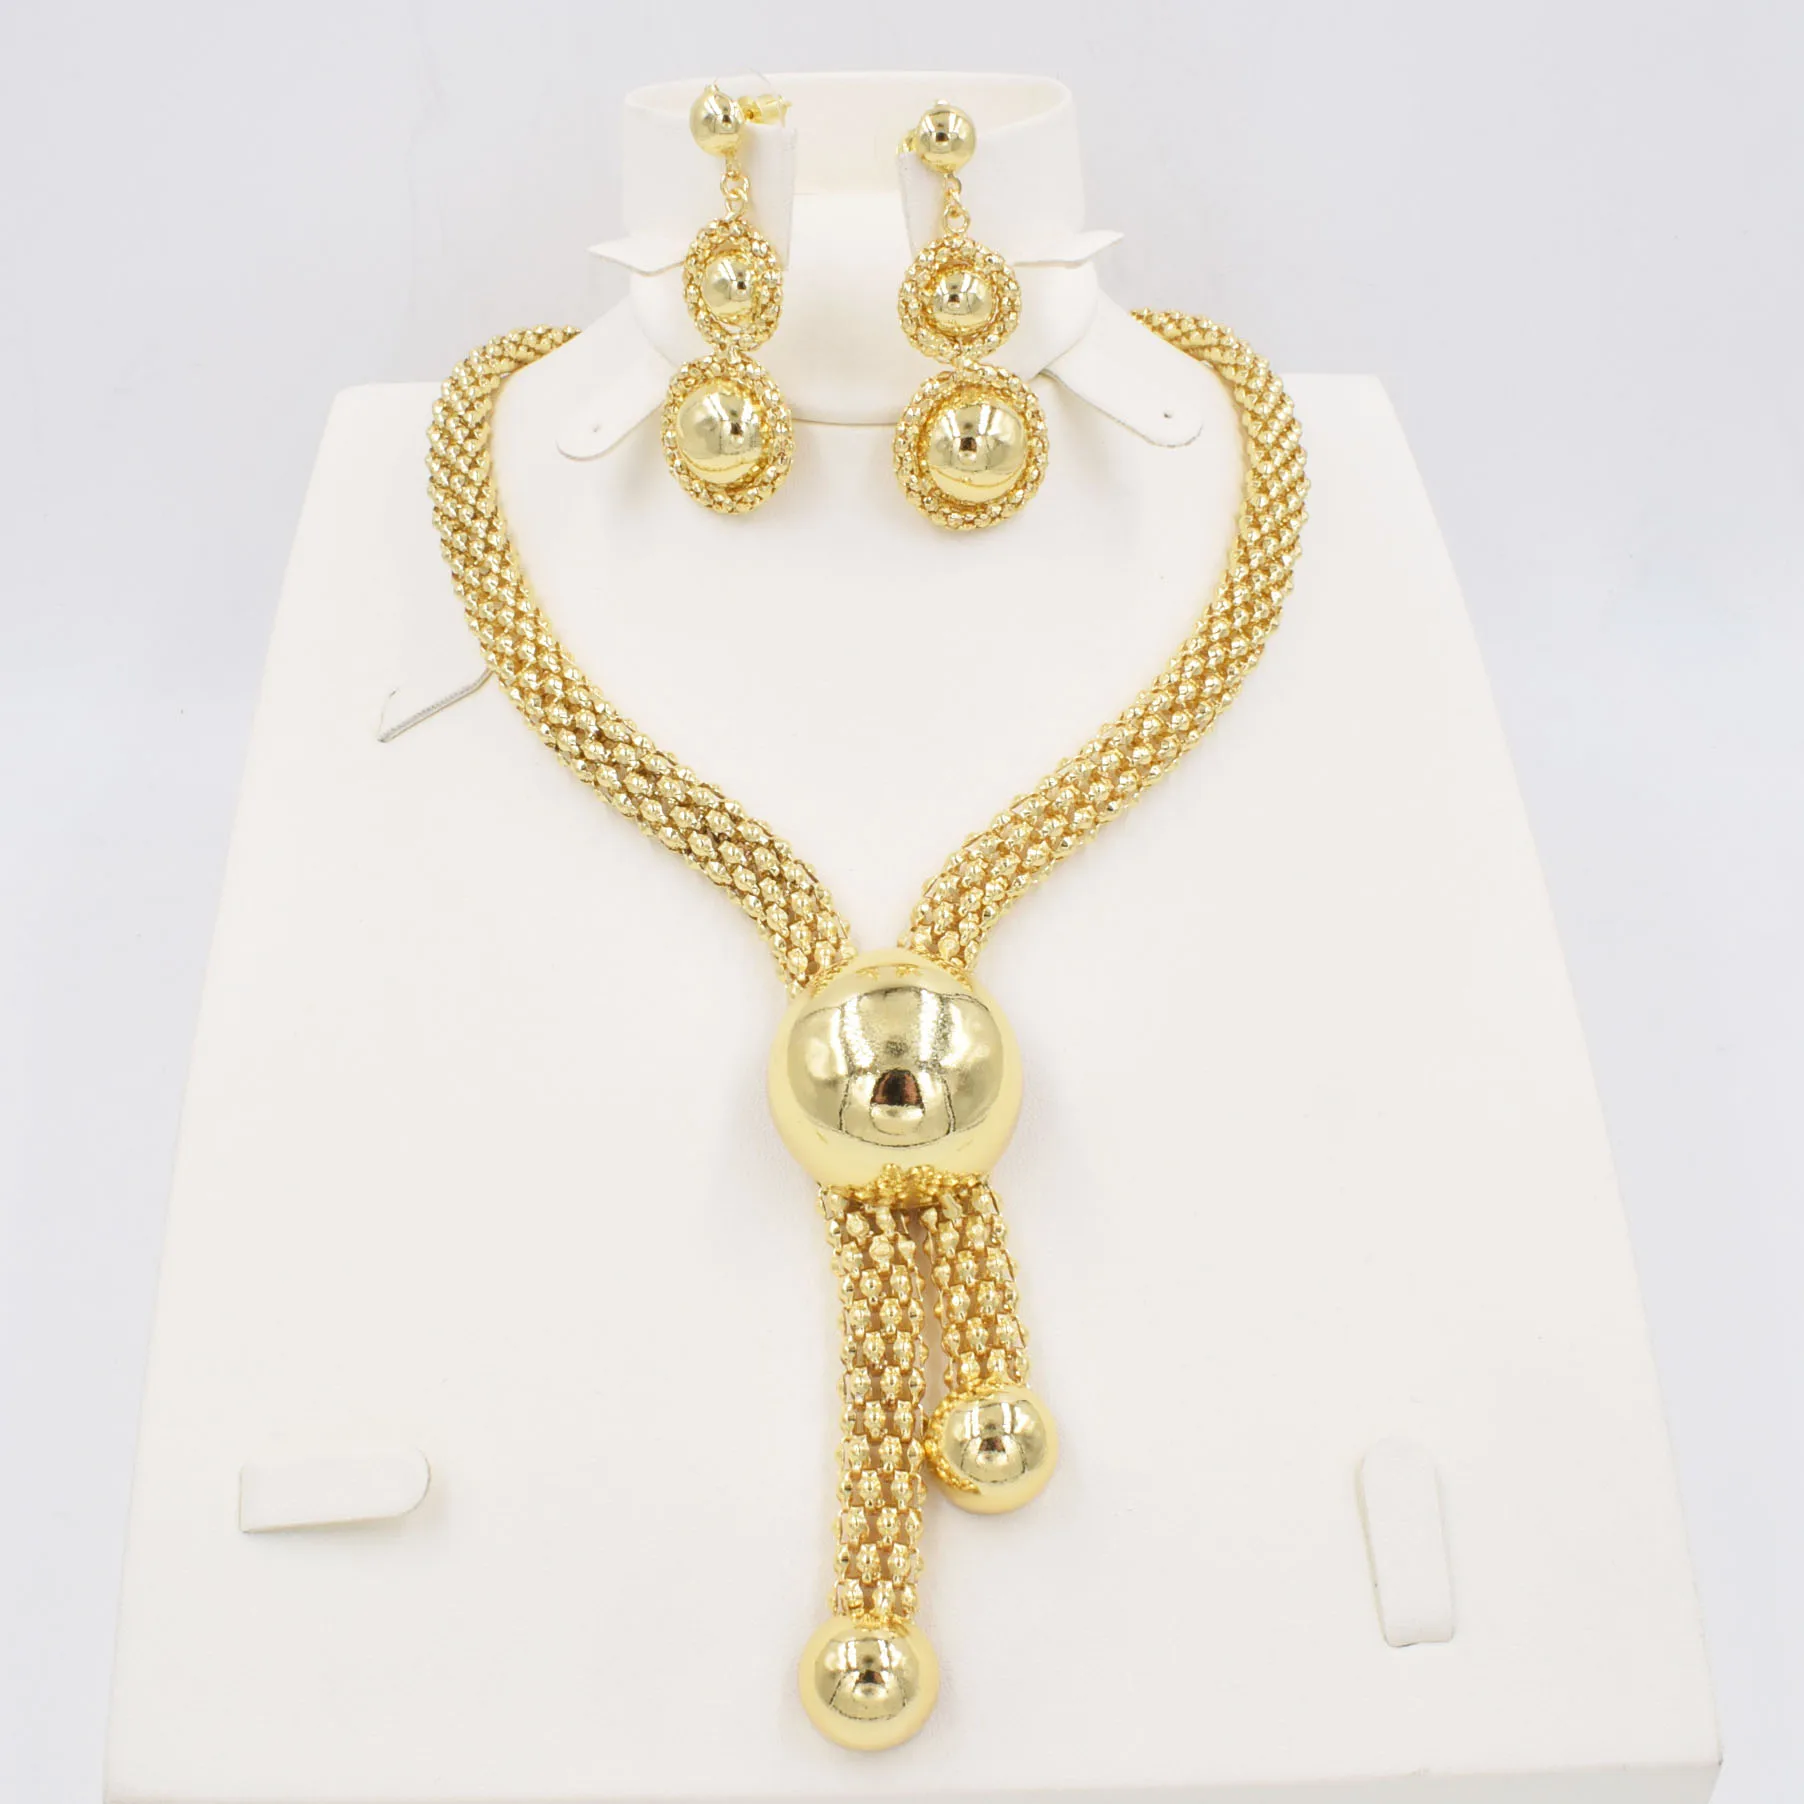 NEW High Quality Ltaly 750 Gold color Jewelry Set For Women african beads fashion necklace set earring jewelry